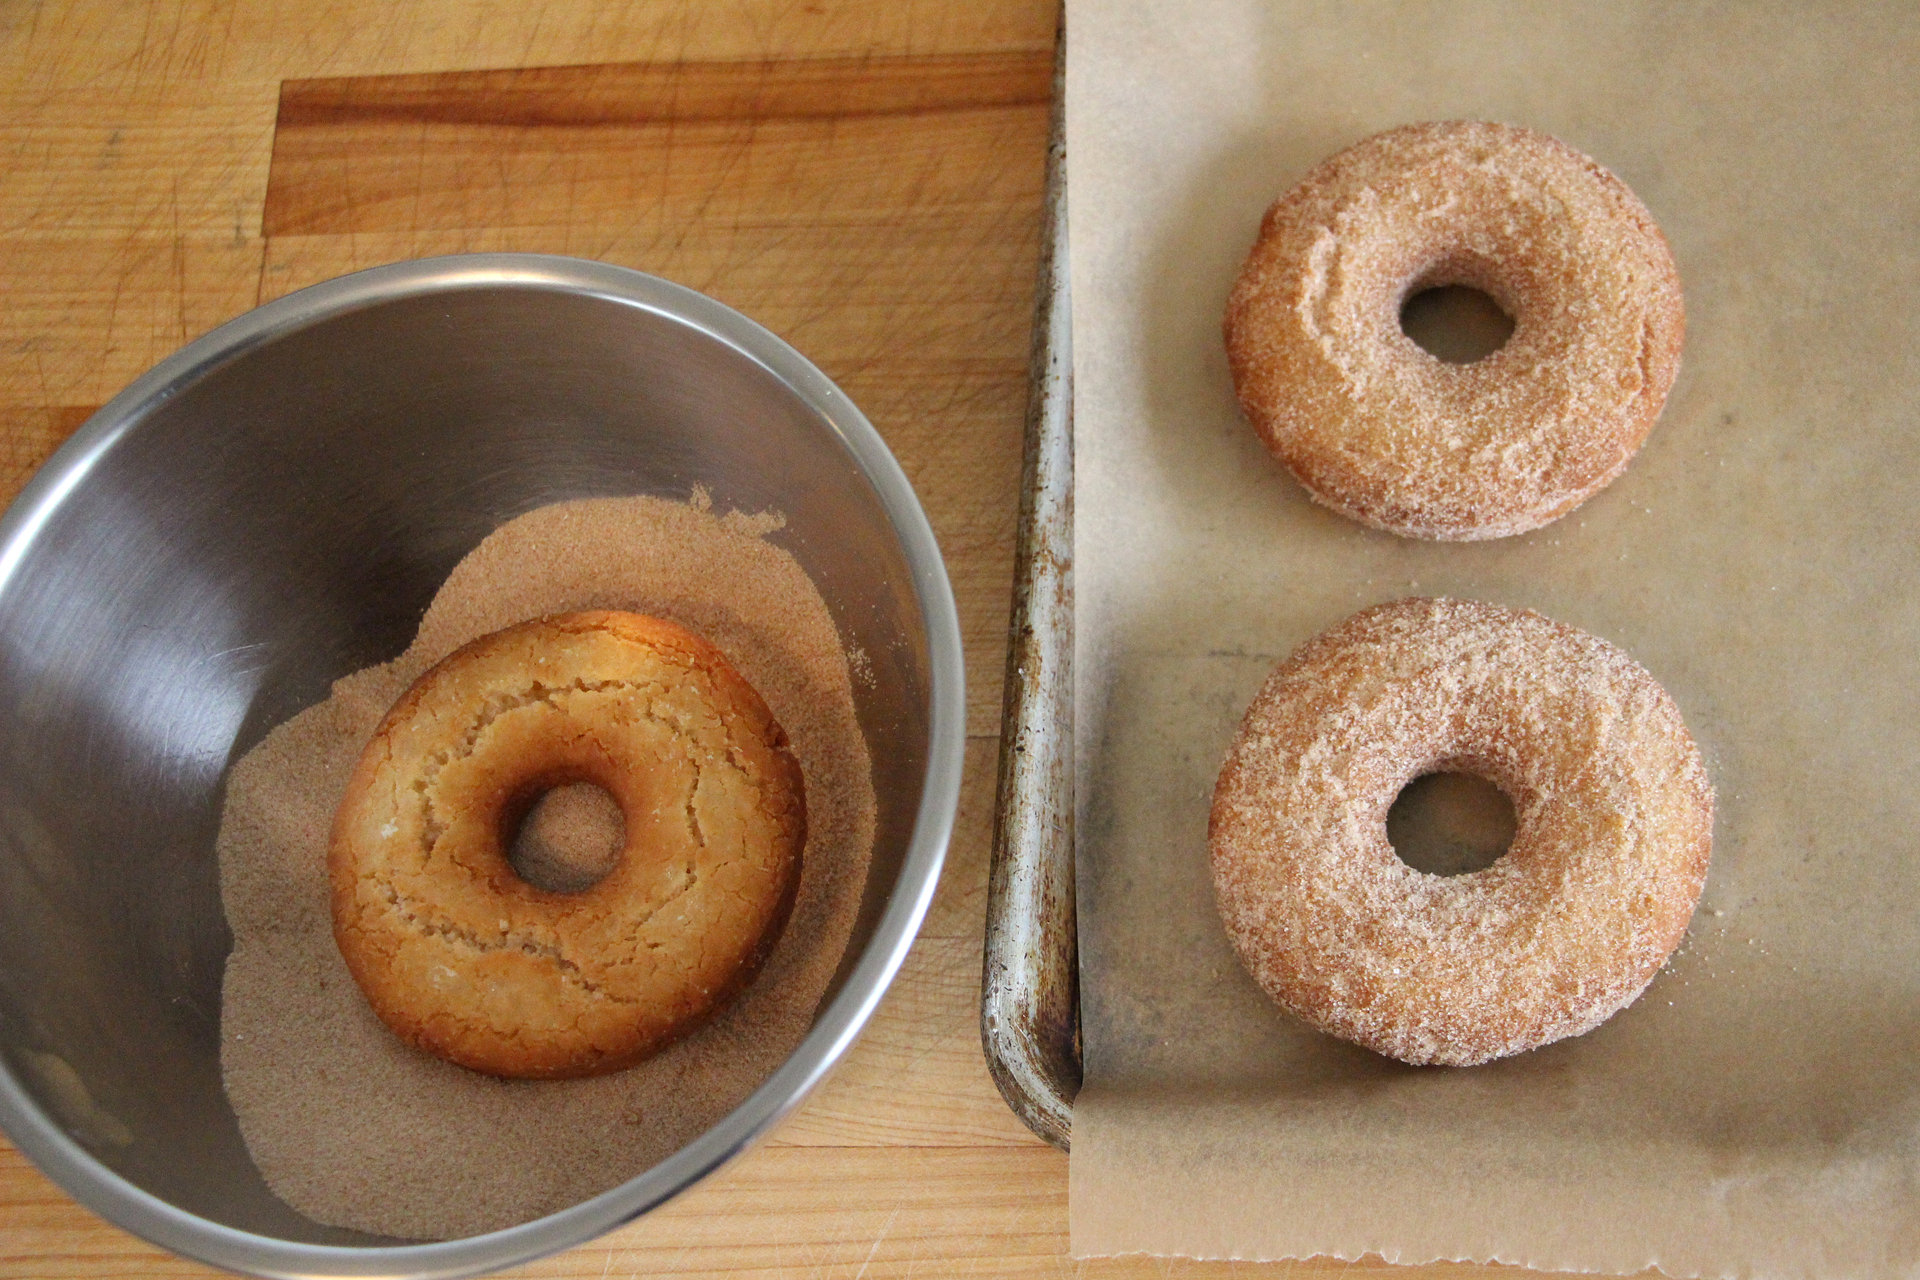 Toss the warm donuts and holes in the cinnamon-sugar.